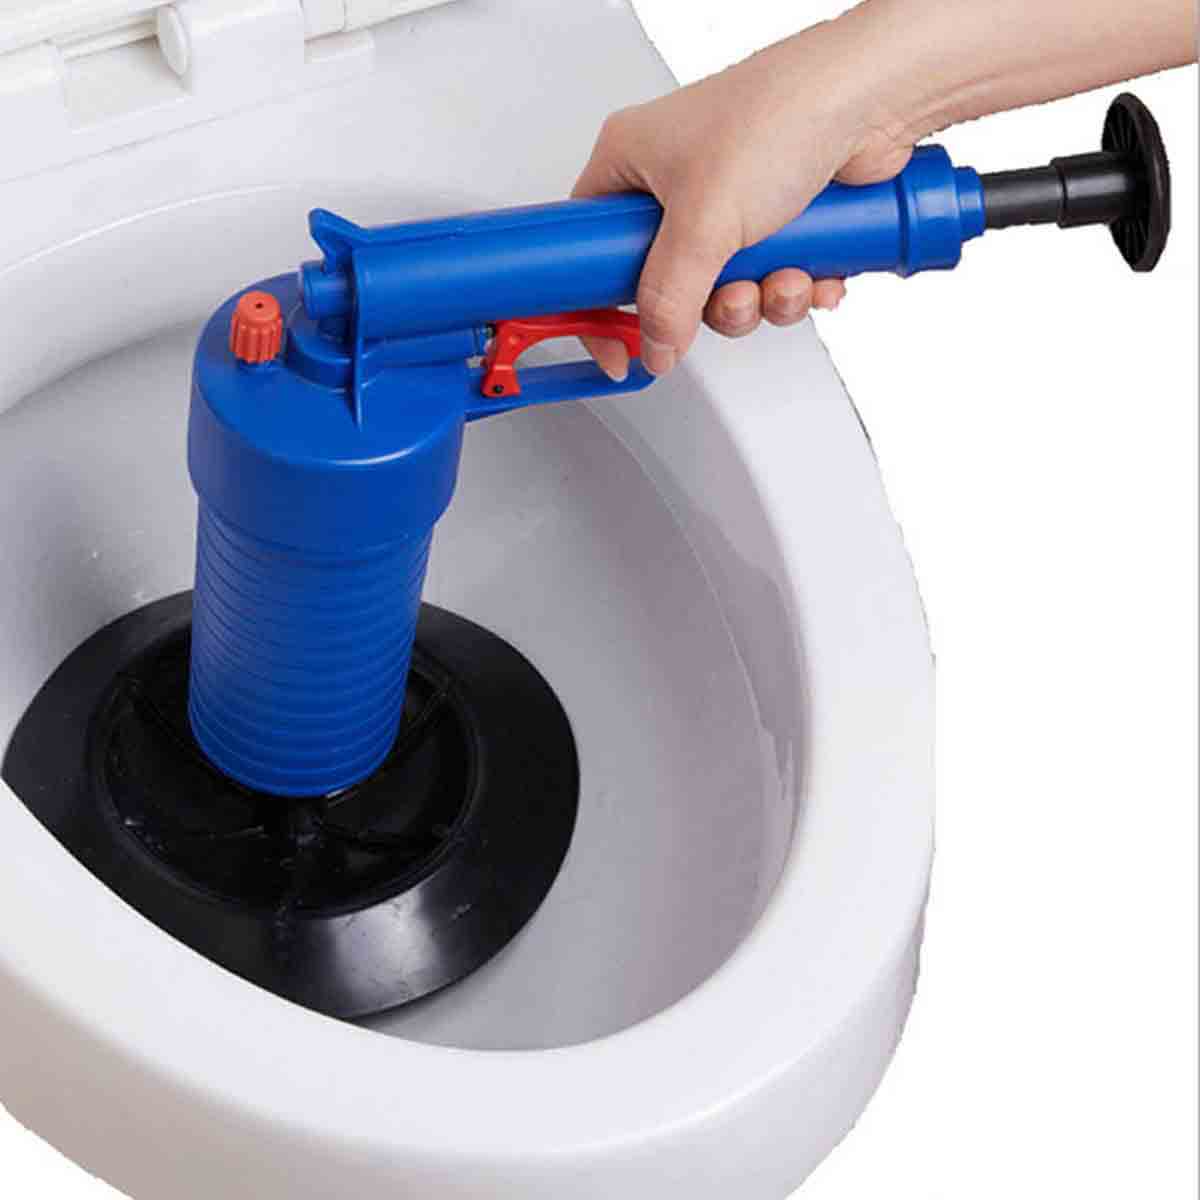 image of Toilet being unblocked using a special Toilet Unblocking tool which is very effective and one we use often